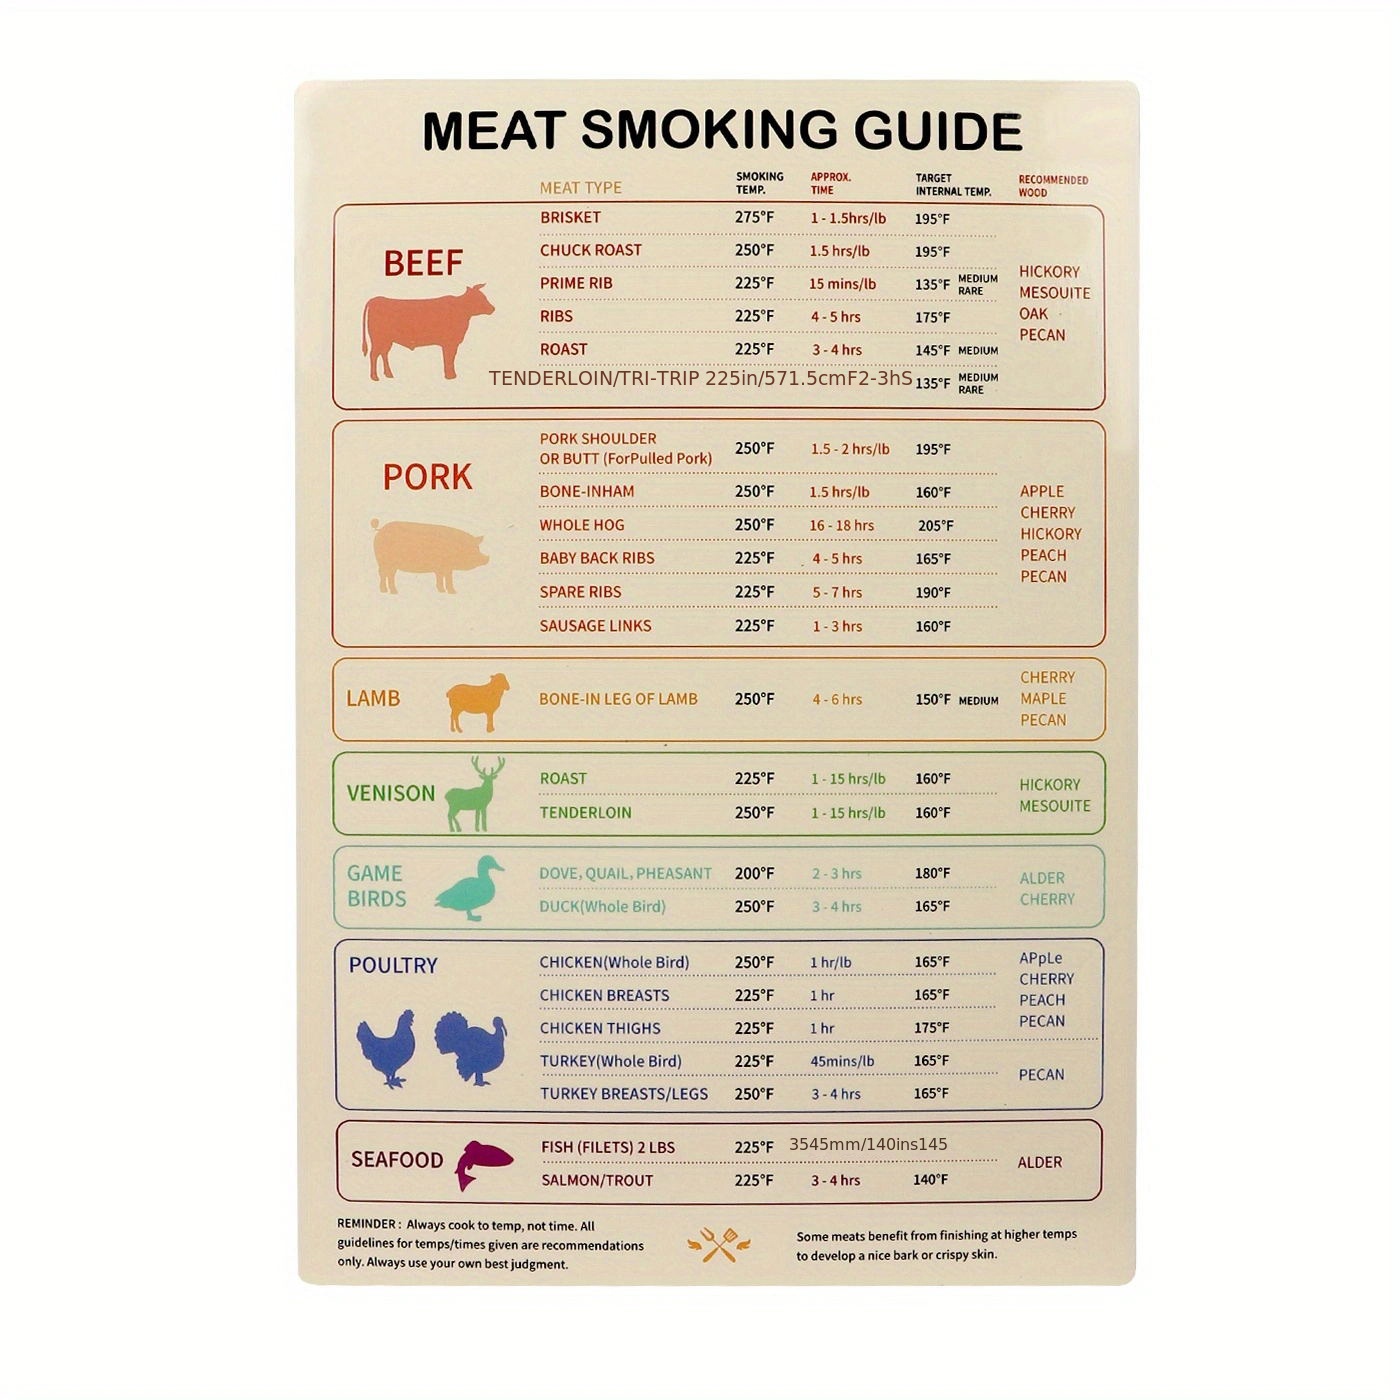 Must-Have Best Meat Smoking Guide Magnet The Only Magnet Covers 31 Mea –  DRG Custom Carts